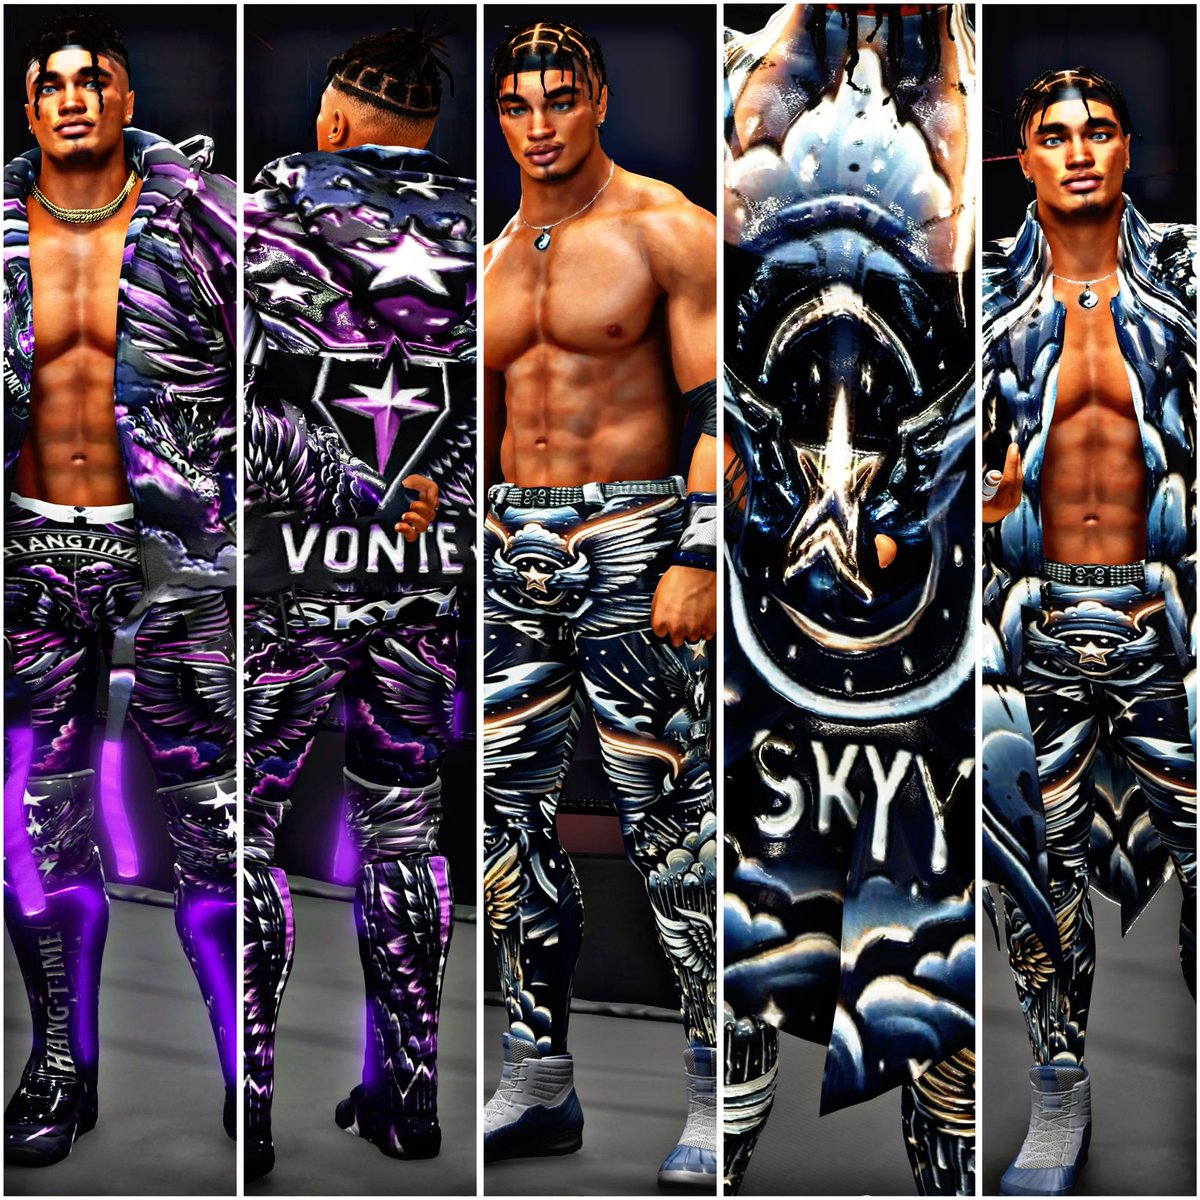 If it’s a brass ring, he’s taking it!

Ladies and Gentlemen 📢 Vontè Skyy is now available on CC. 

He was fun to create in such a short time. But I like how he turned out.

Tags: vskyy, hangtime, luckcaw24

Thanks for the support. Yall are the best. Have fun! #WWE2K24